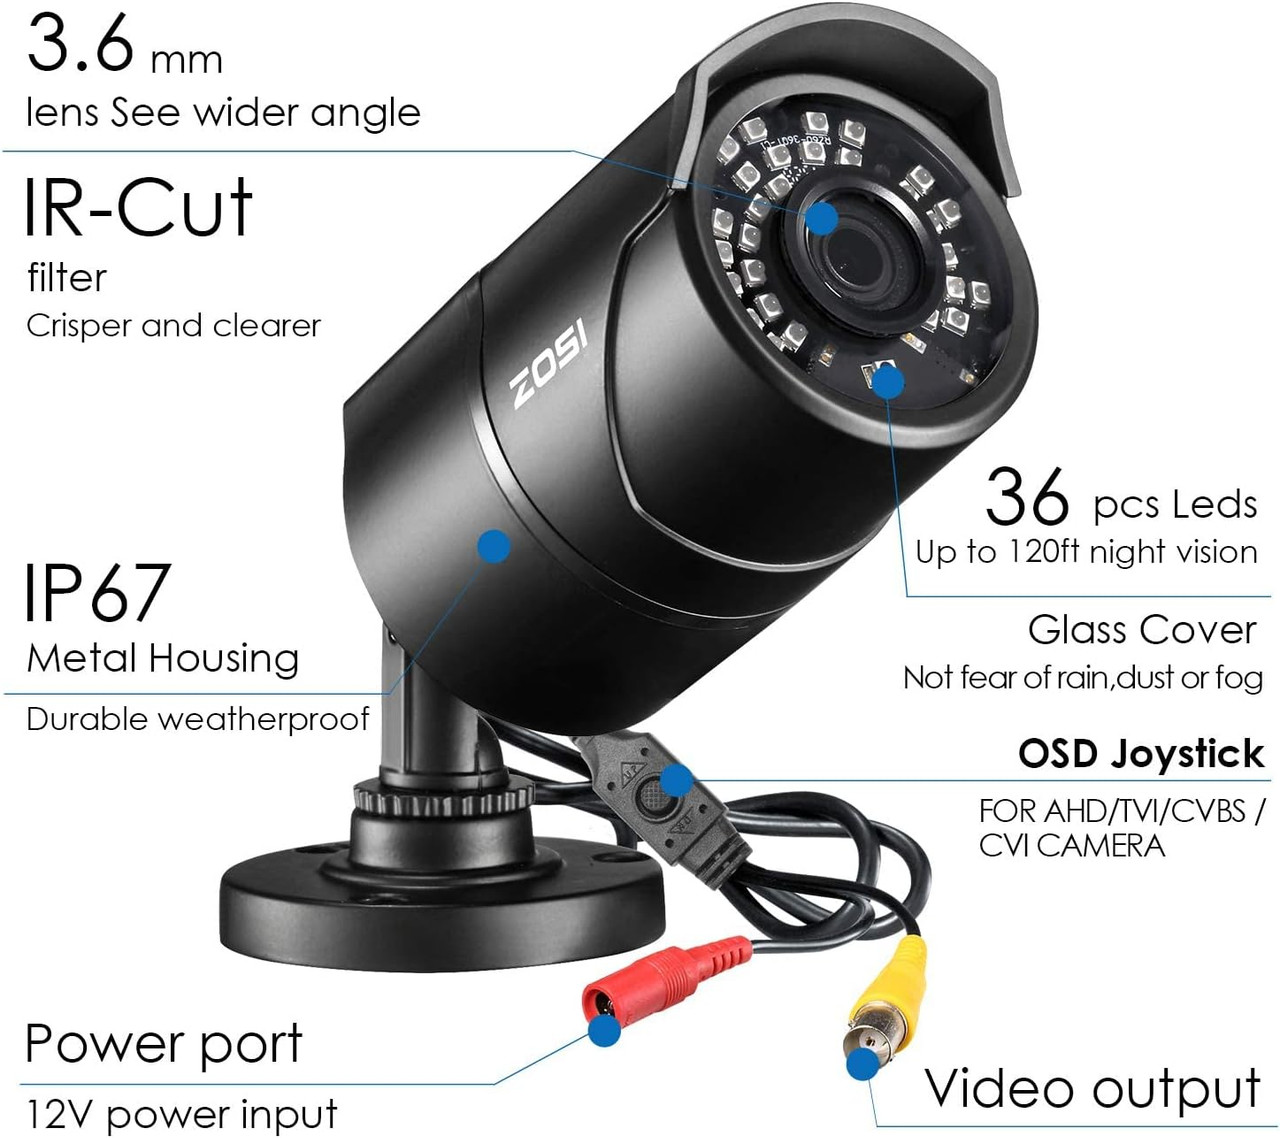 ZOSI  2MP (2K) HD-TVI \CVI\AHD 3.6mm Bullet Security Camera, Indoor Outdoor, 120ft Night Vision, Weatherproof, Black - [From 98.00 - Choose pk Qty ] - *Ships from Miami